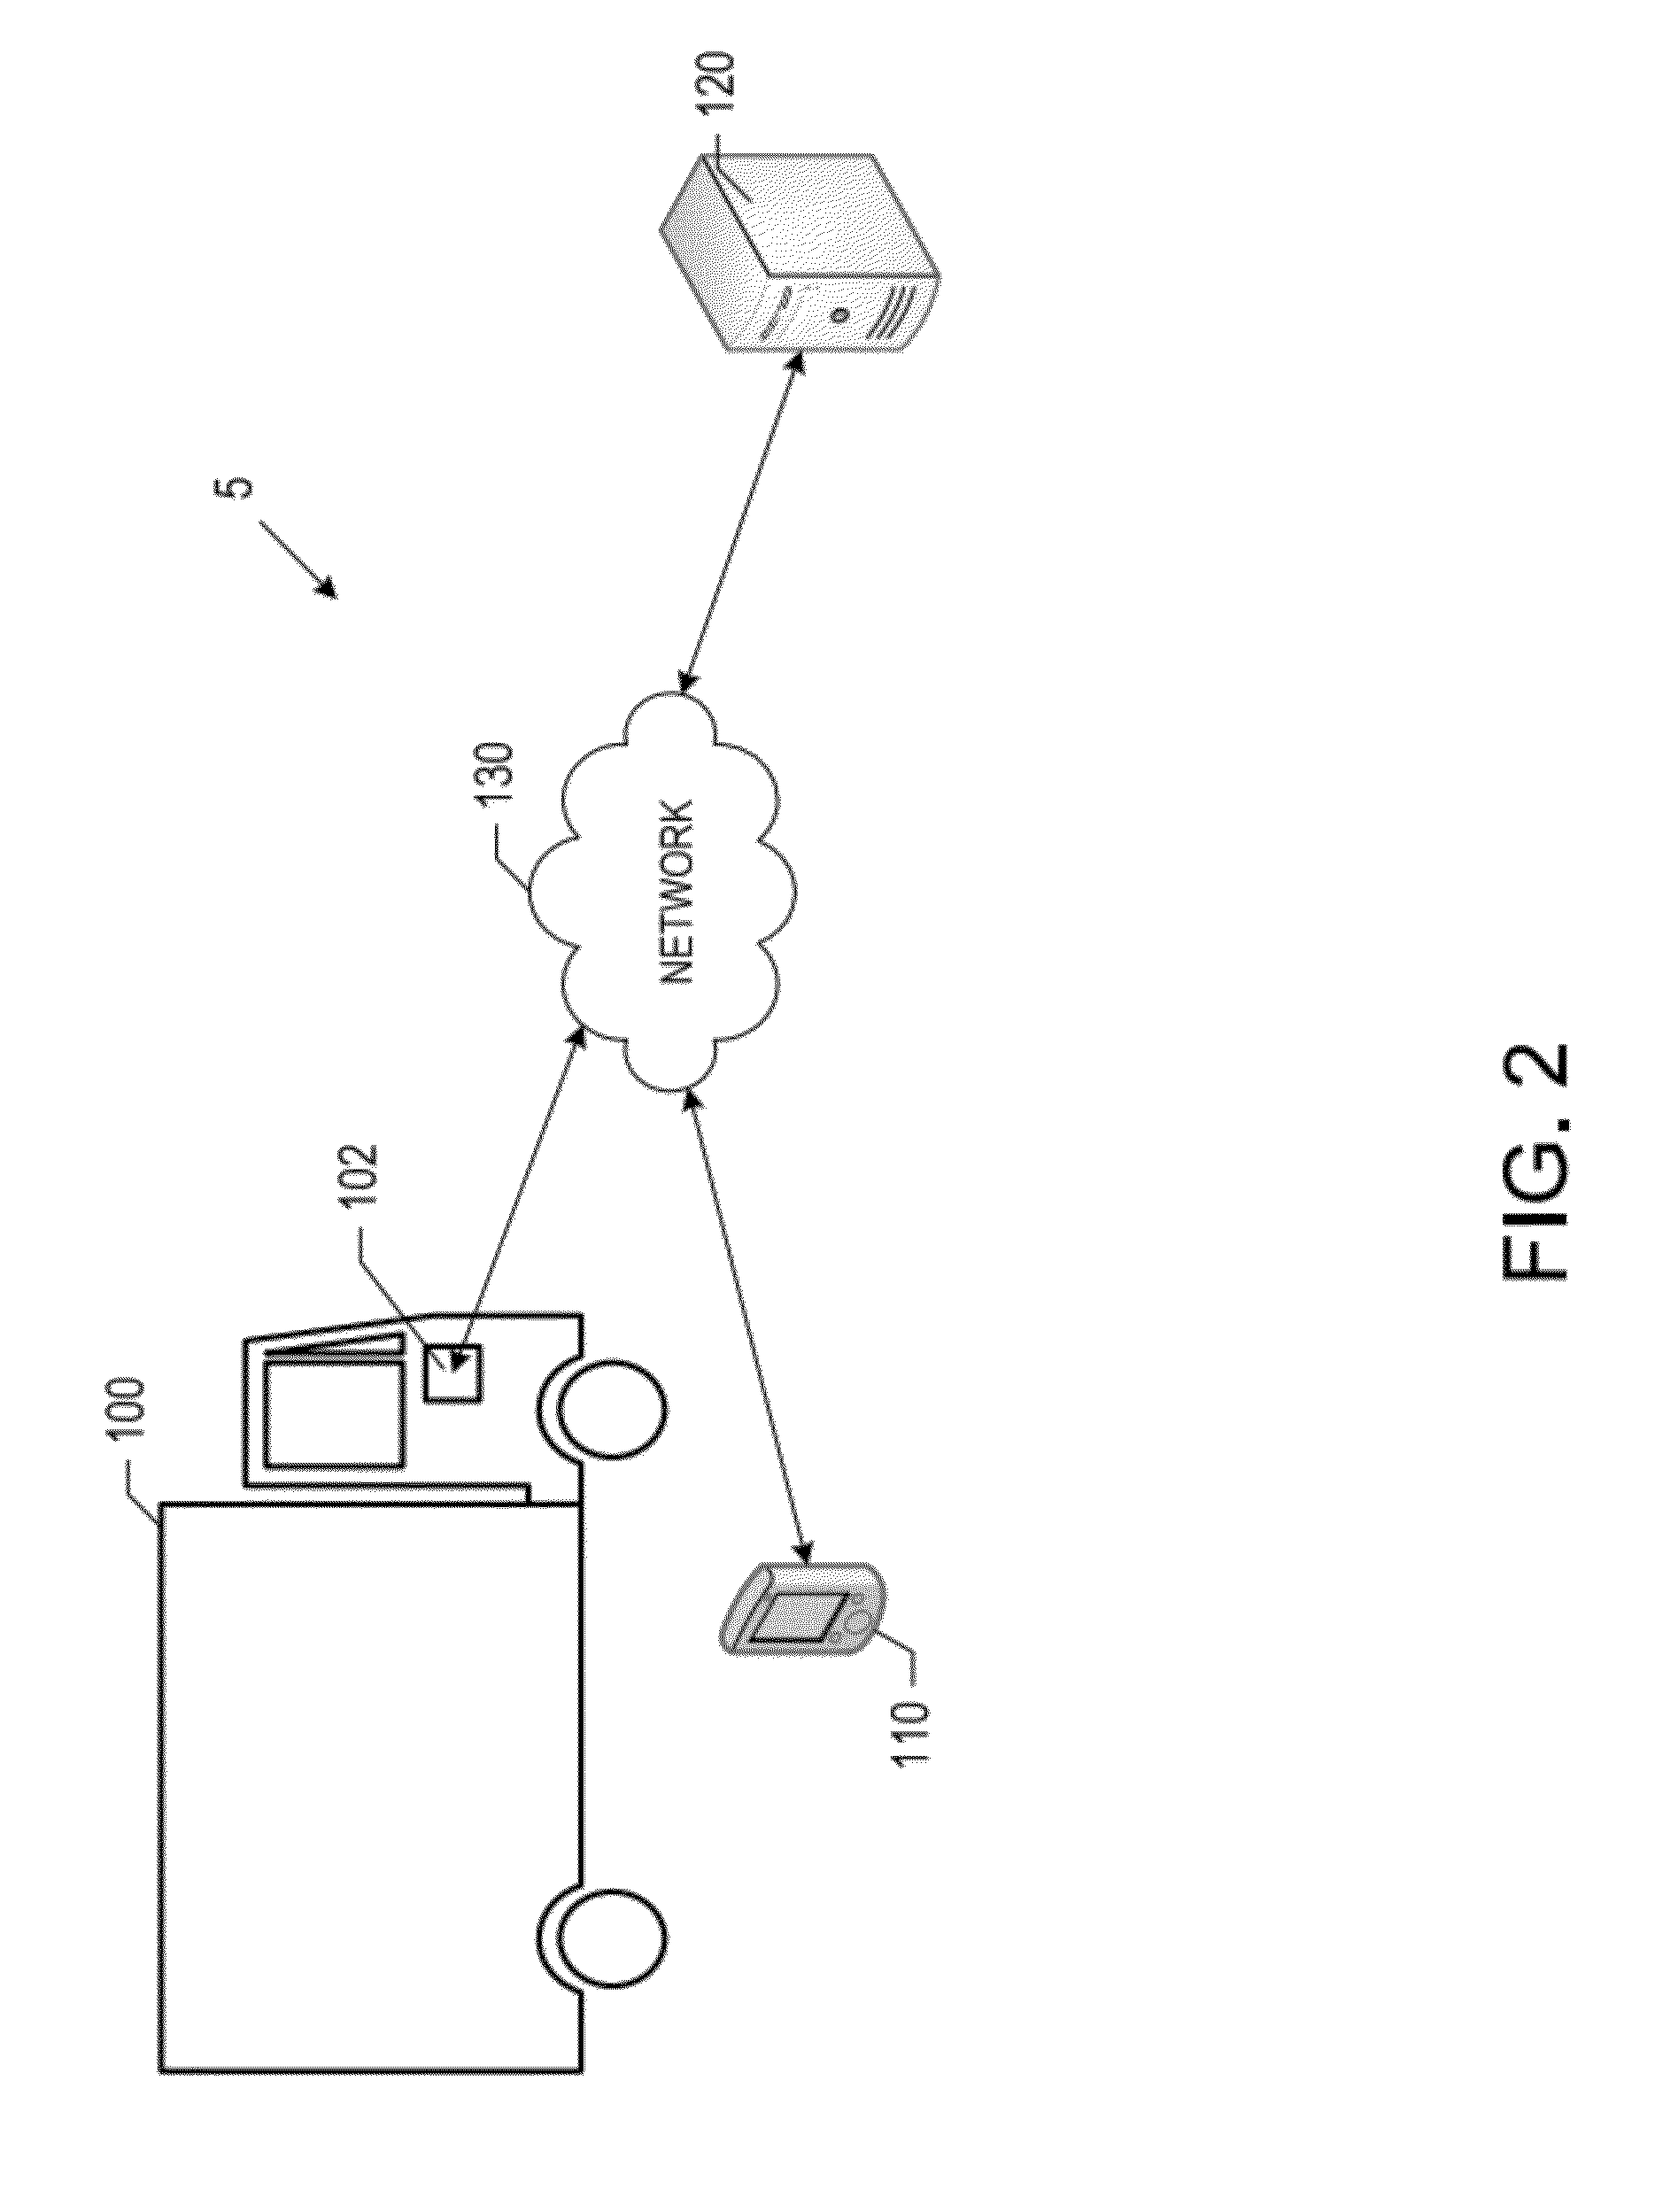 Systems and methods for updating maps based on telematics data